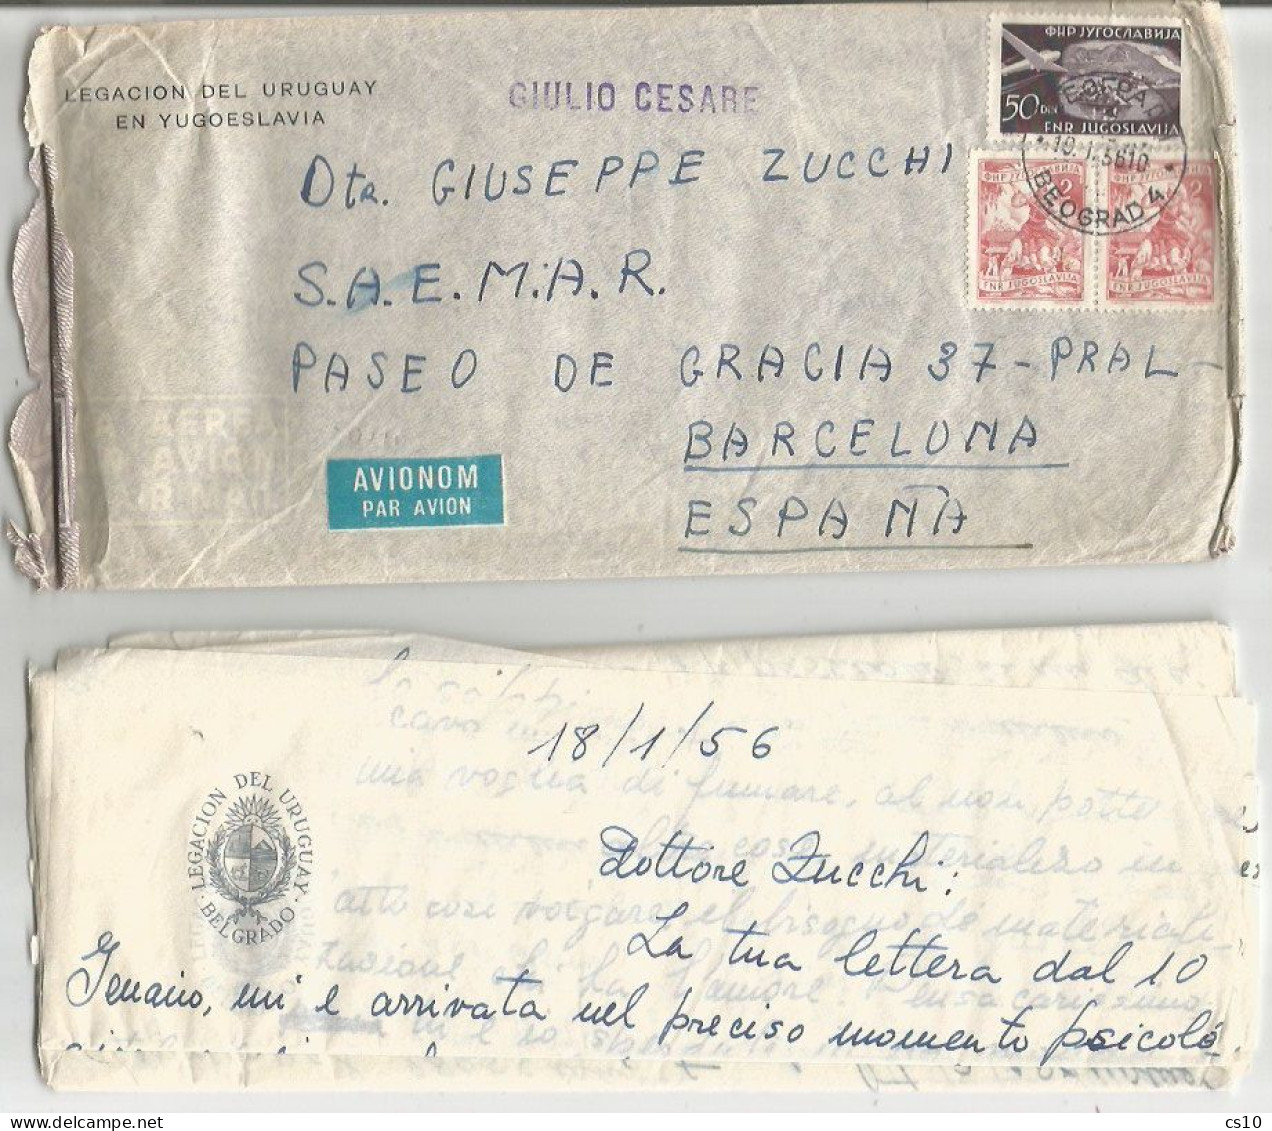 Jugoslavija Legation Uruguay AirmailCV Beograd 19jan1956 X Spain To S/S "Giulio Cesare" With Content (6pages) - Aéreo